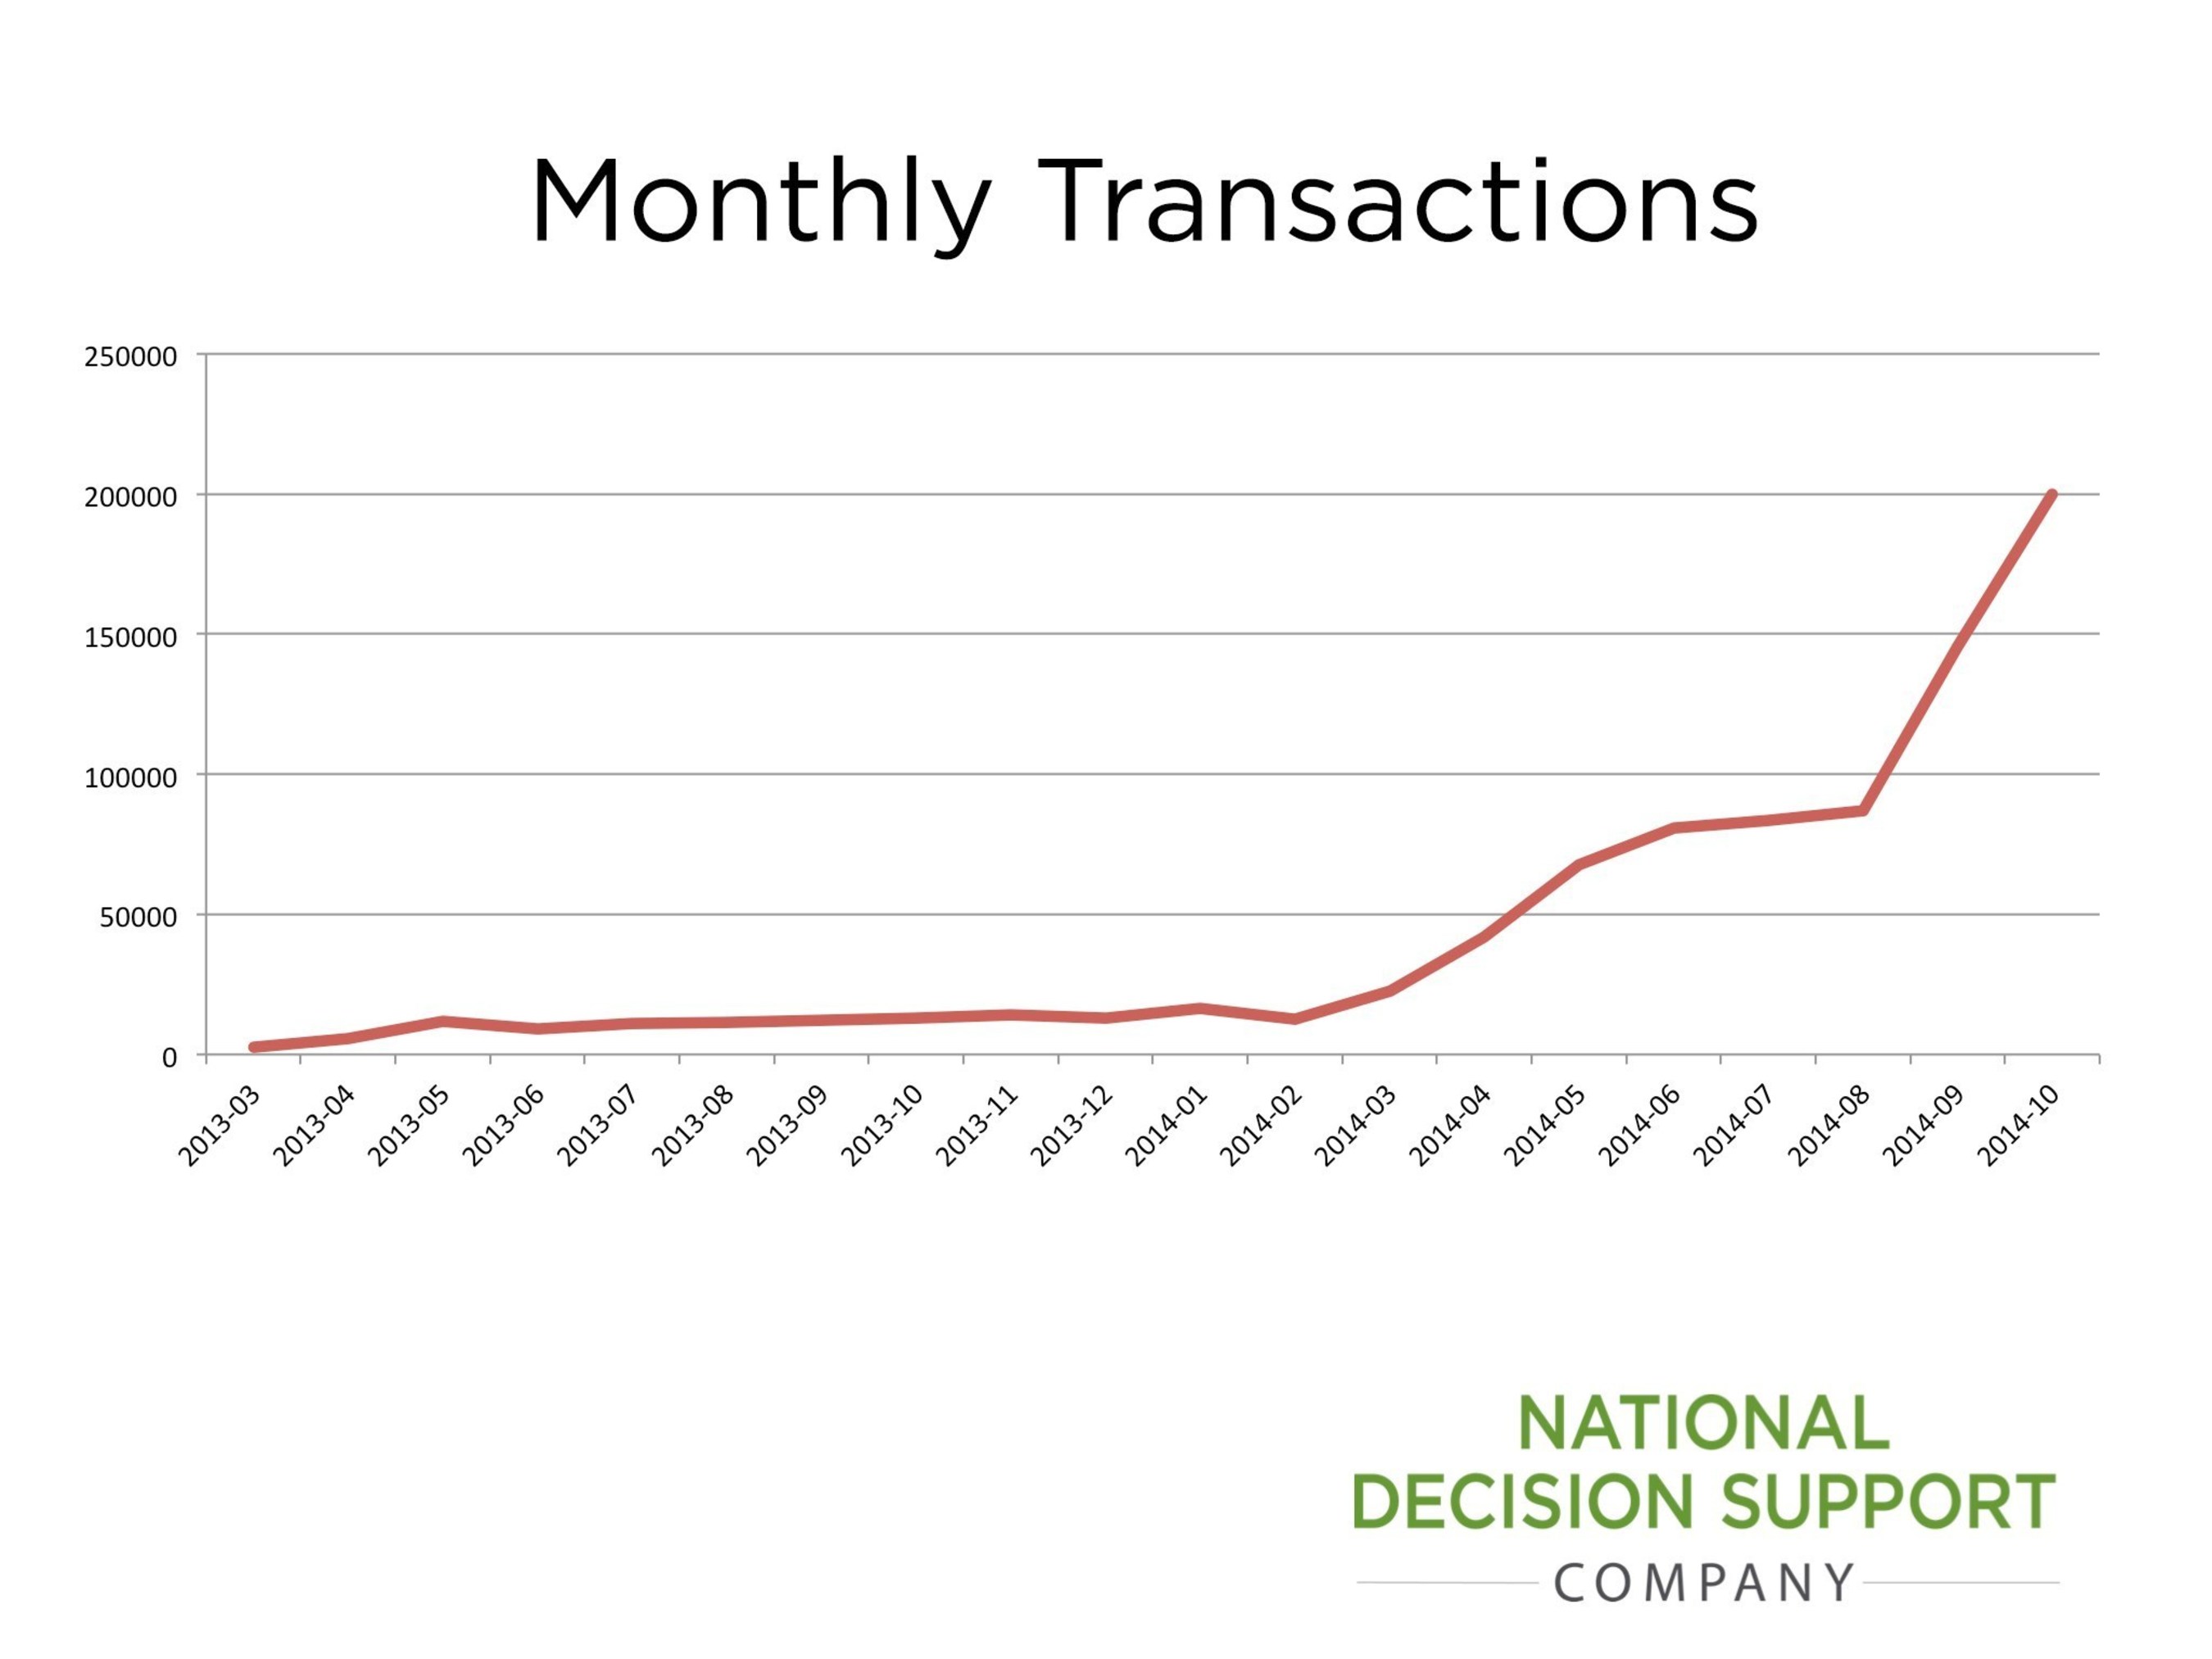 National Decision Support Company Content Delivery Platform Exceeds 200,000 Monthly Decision Support Transactions